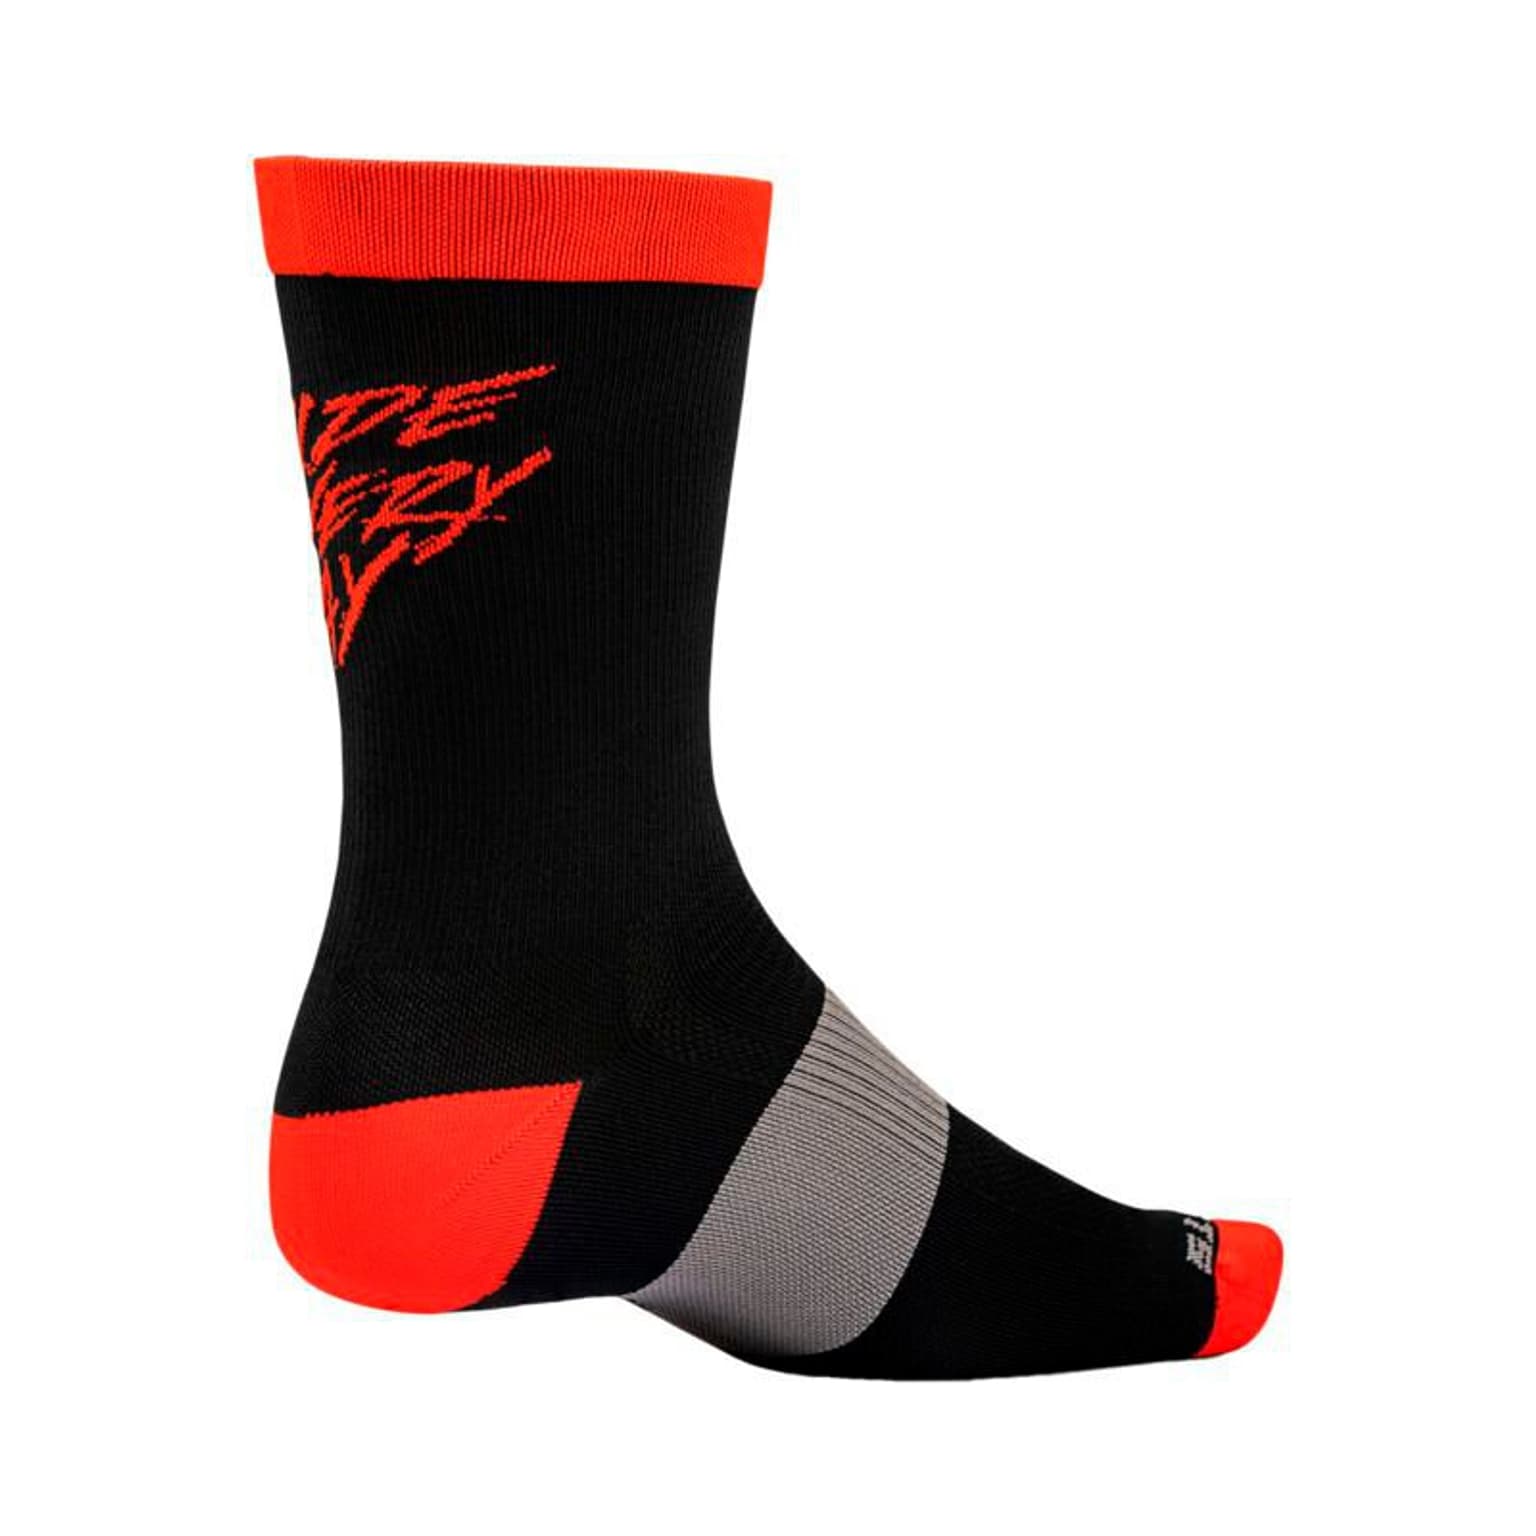 Ride Concepts Ride Concepts Ride Every Day Synthetic Velosocken rot 1